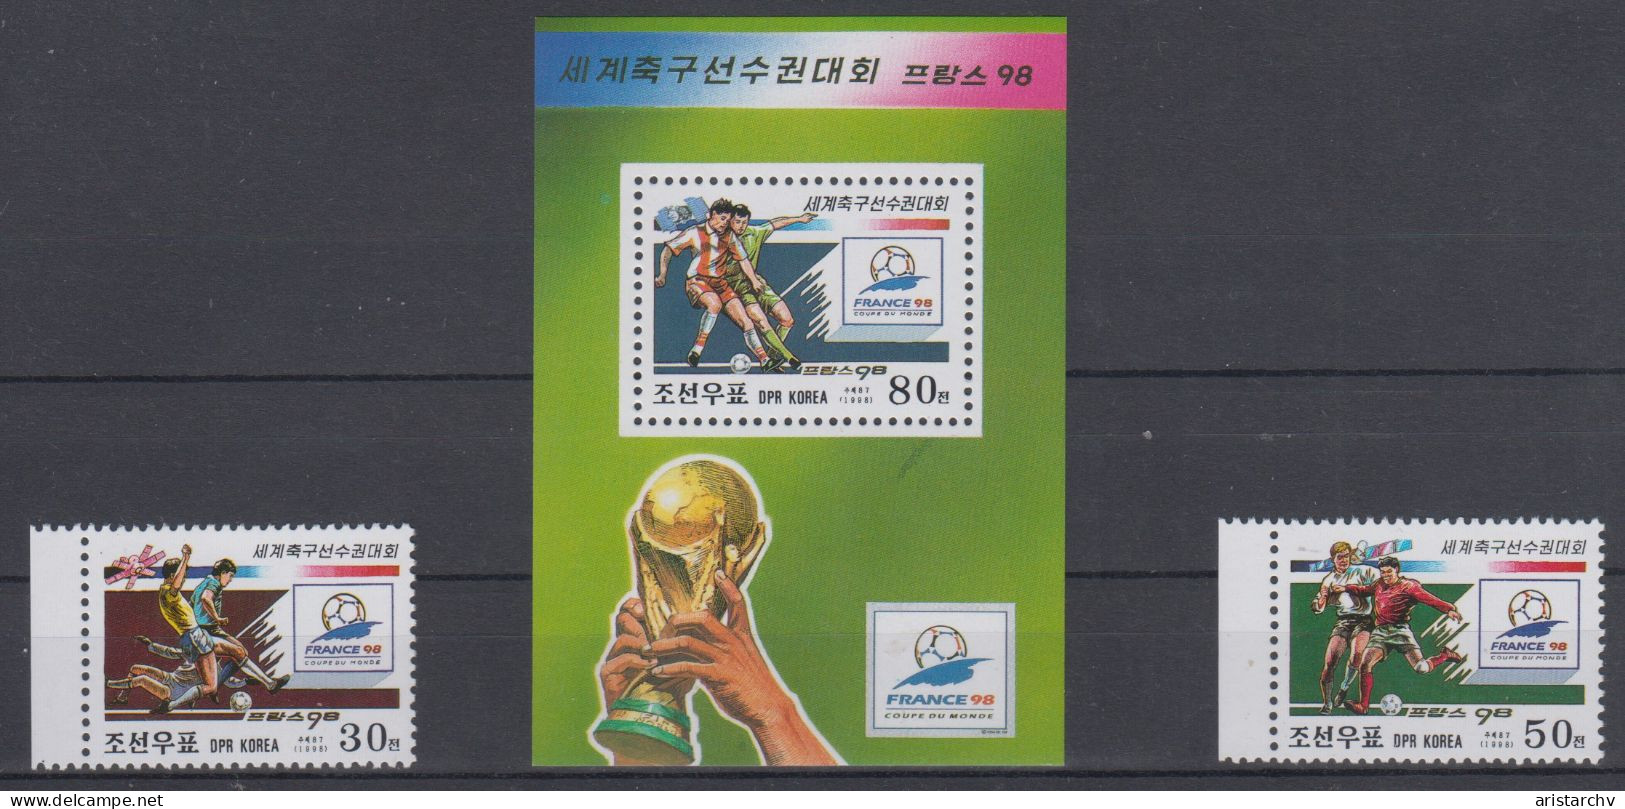 NORTH KOREA 1998 FOOTBALL WORLD CUP S/SHEET 2 STAMPS AND SHEETLET - 1998 – France